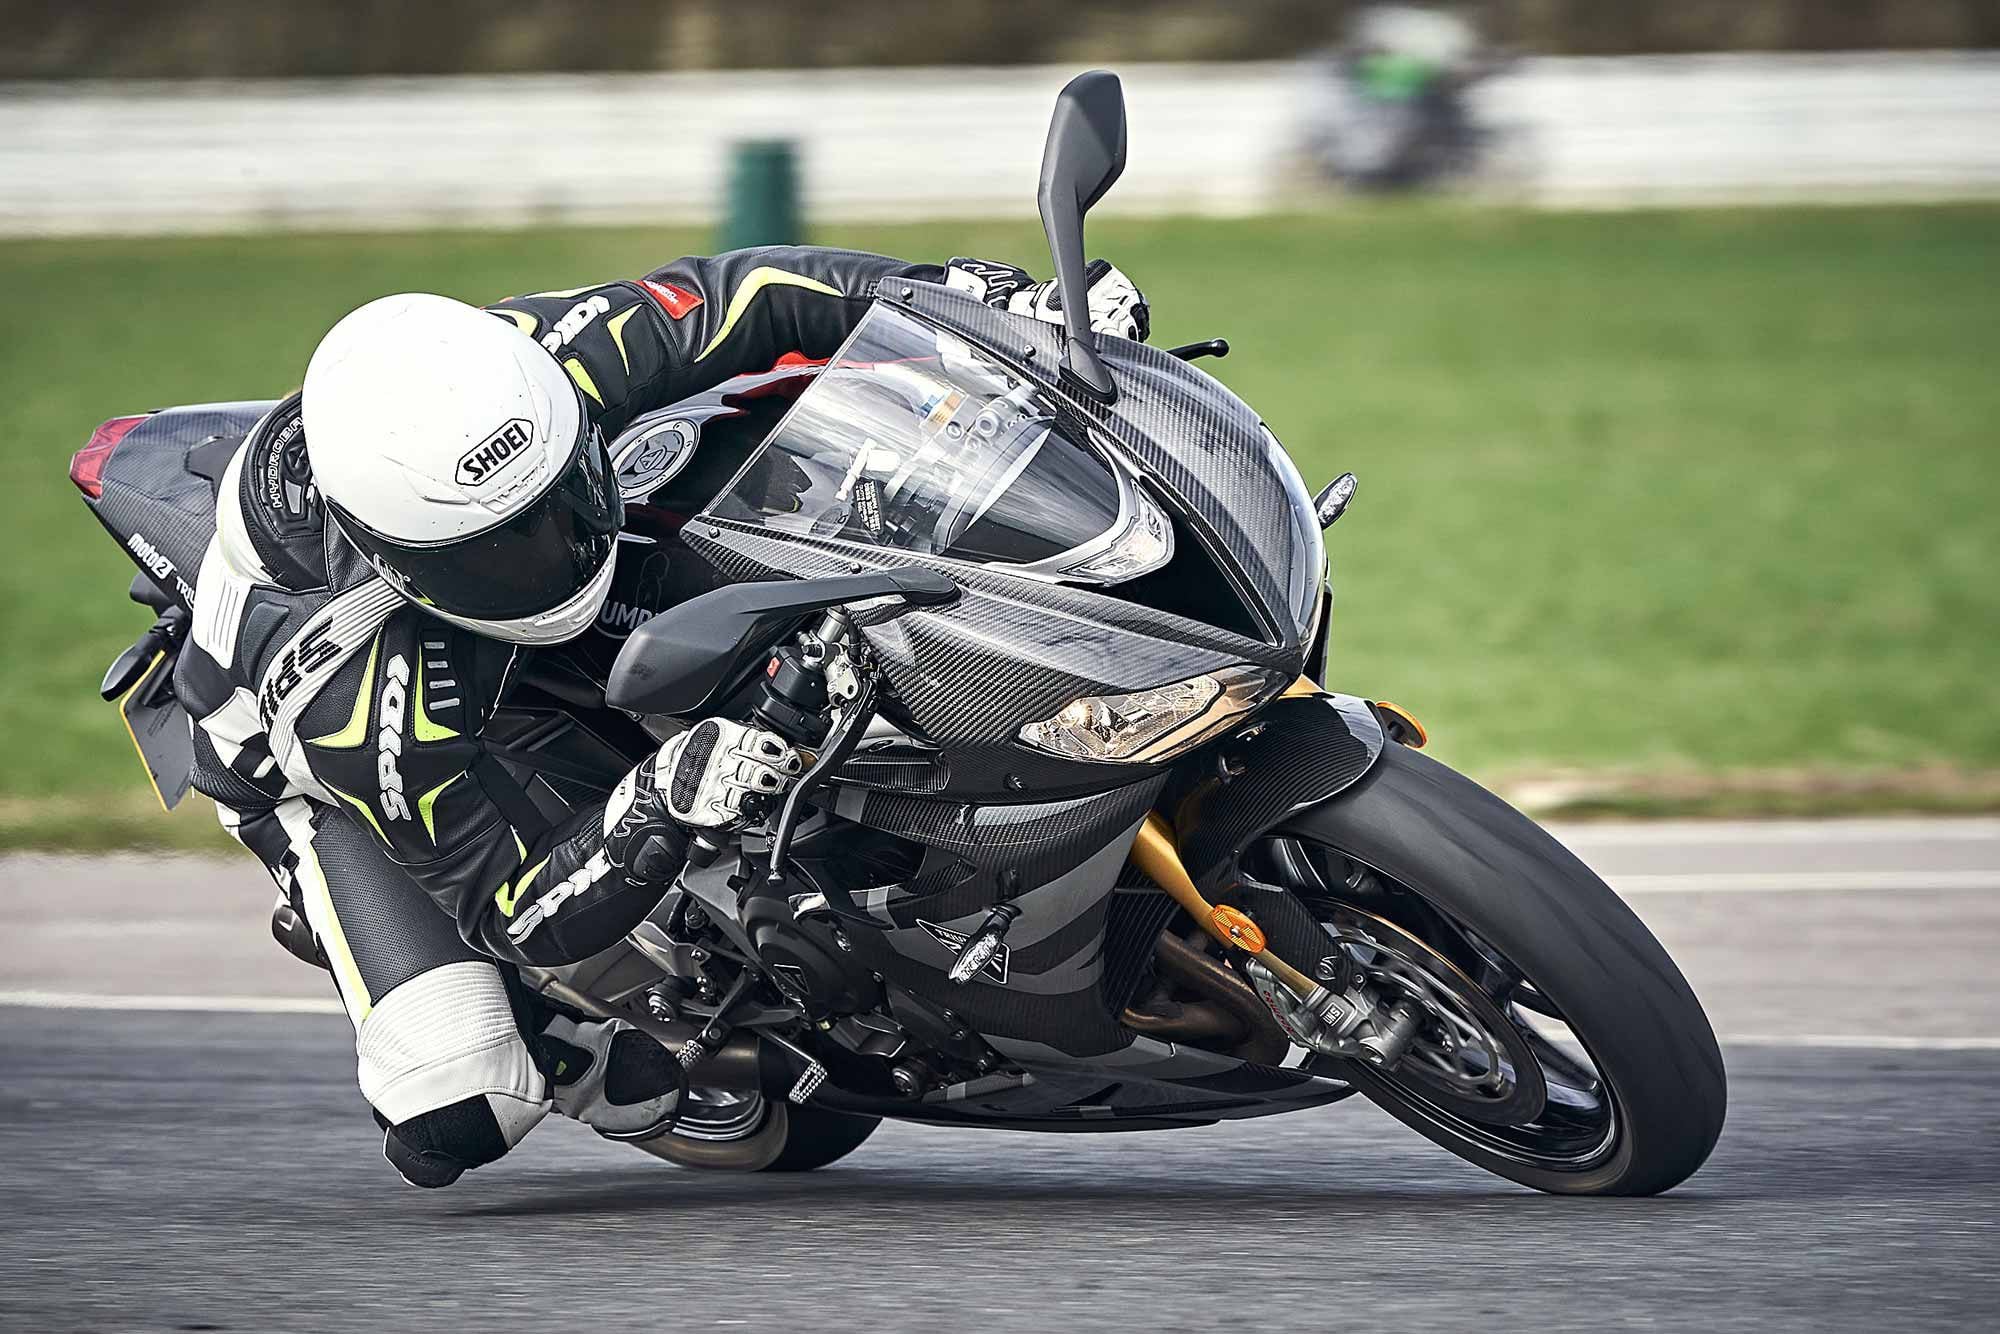 The 2021 Triumph Daytona Moto2 765 is faster and more refined in nearly every aspect over the 675, but does that make the 2006 model bad? Absolutely not.